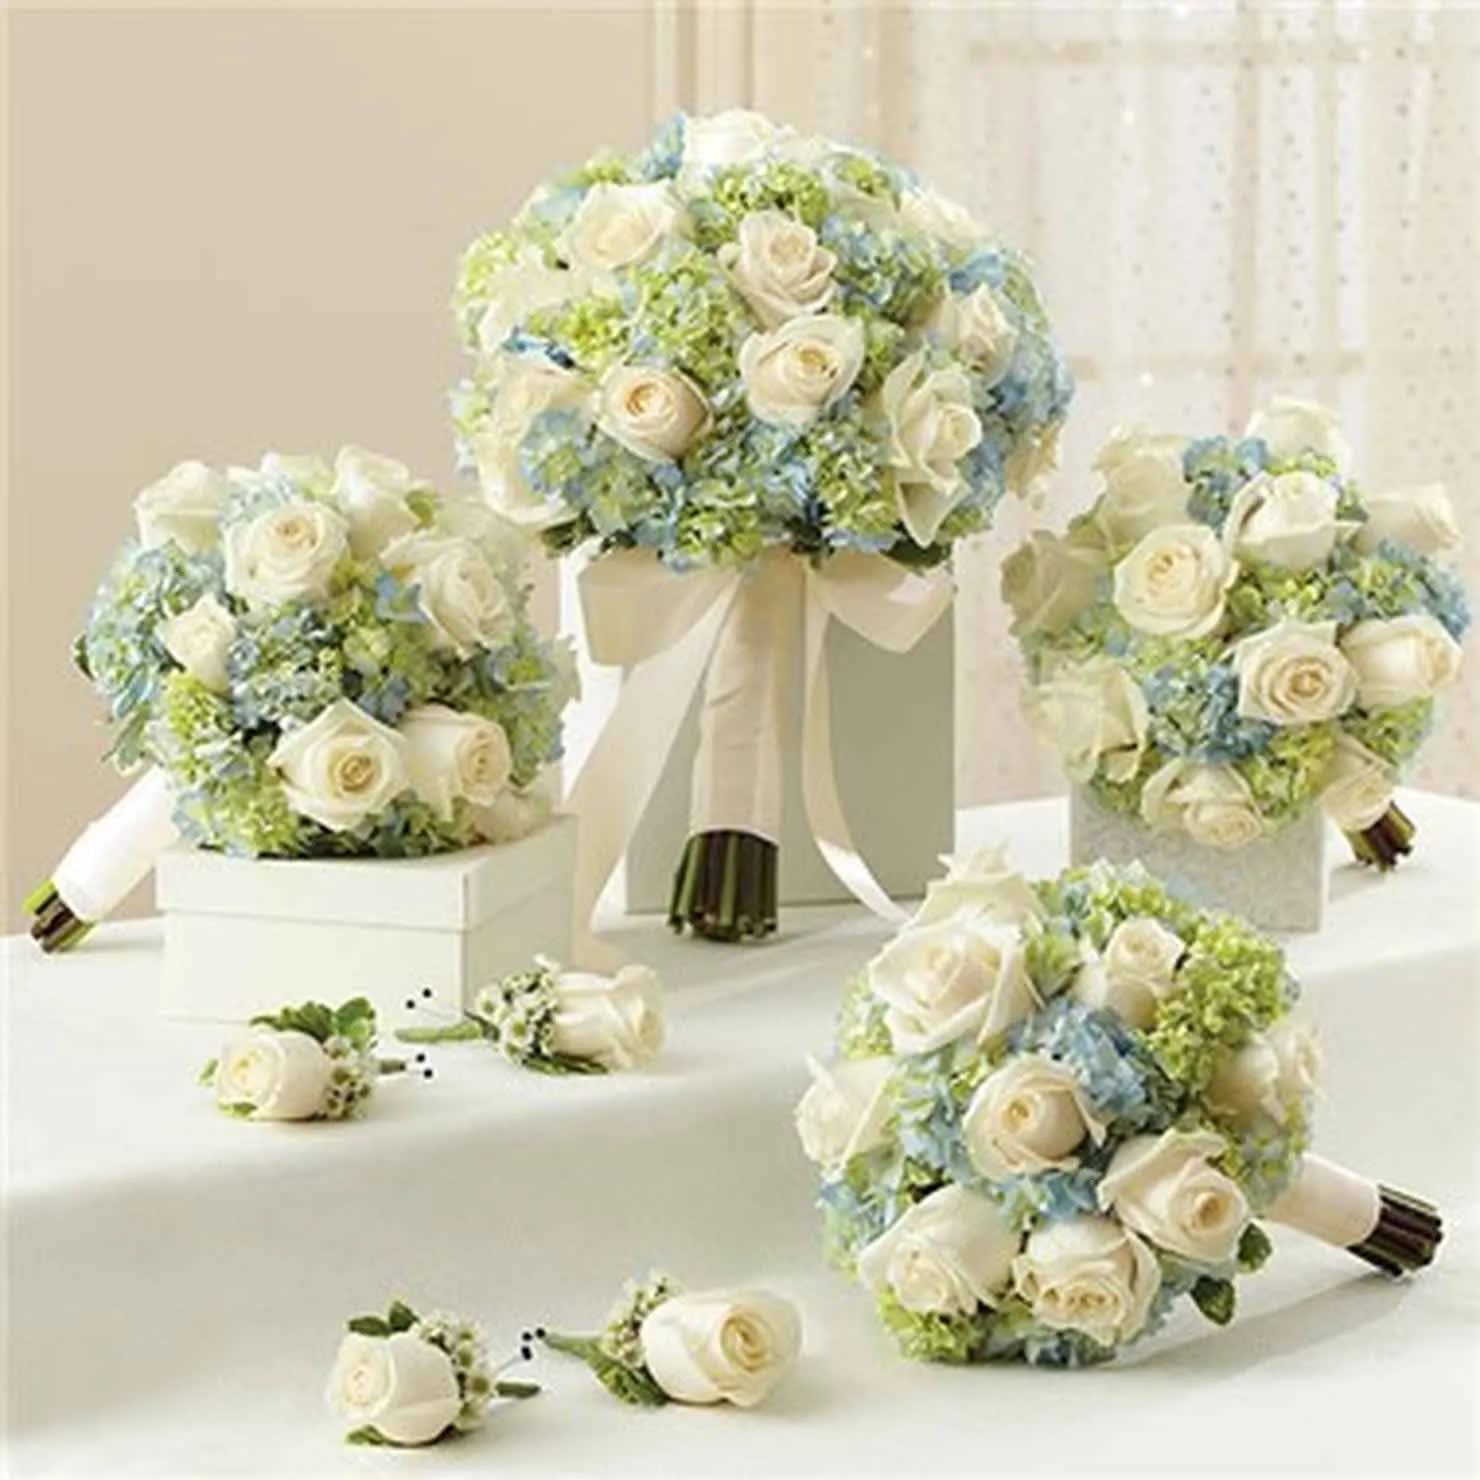 Victorian Romance Wedding Package - Anyone looking for lush and romantic need look no further. The Victorian Romance collection combines the full lush look of hydrangea with the timeless beauty of roses. This collection can be ordered in whatever color combination you choose and individual pieces can be added at a per price cost. Featured are 1 Bridal Bouquet, 5 Bridesmaids Bouquets, 8 Boutonnieres, 2 Corsages, 1 Bag of Petals, and 1 Toss Bouquet. Delivery is not included in this cost and is subject to location. 